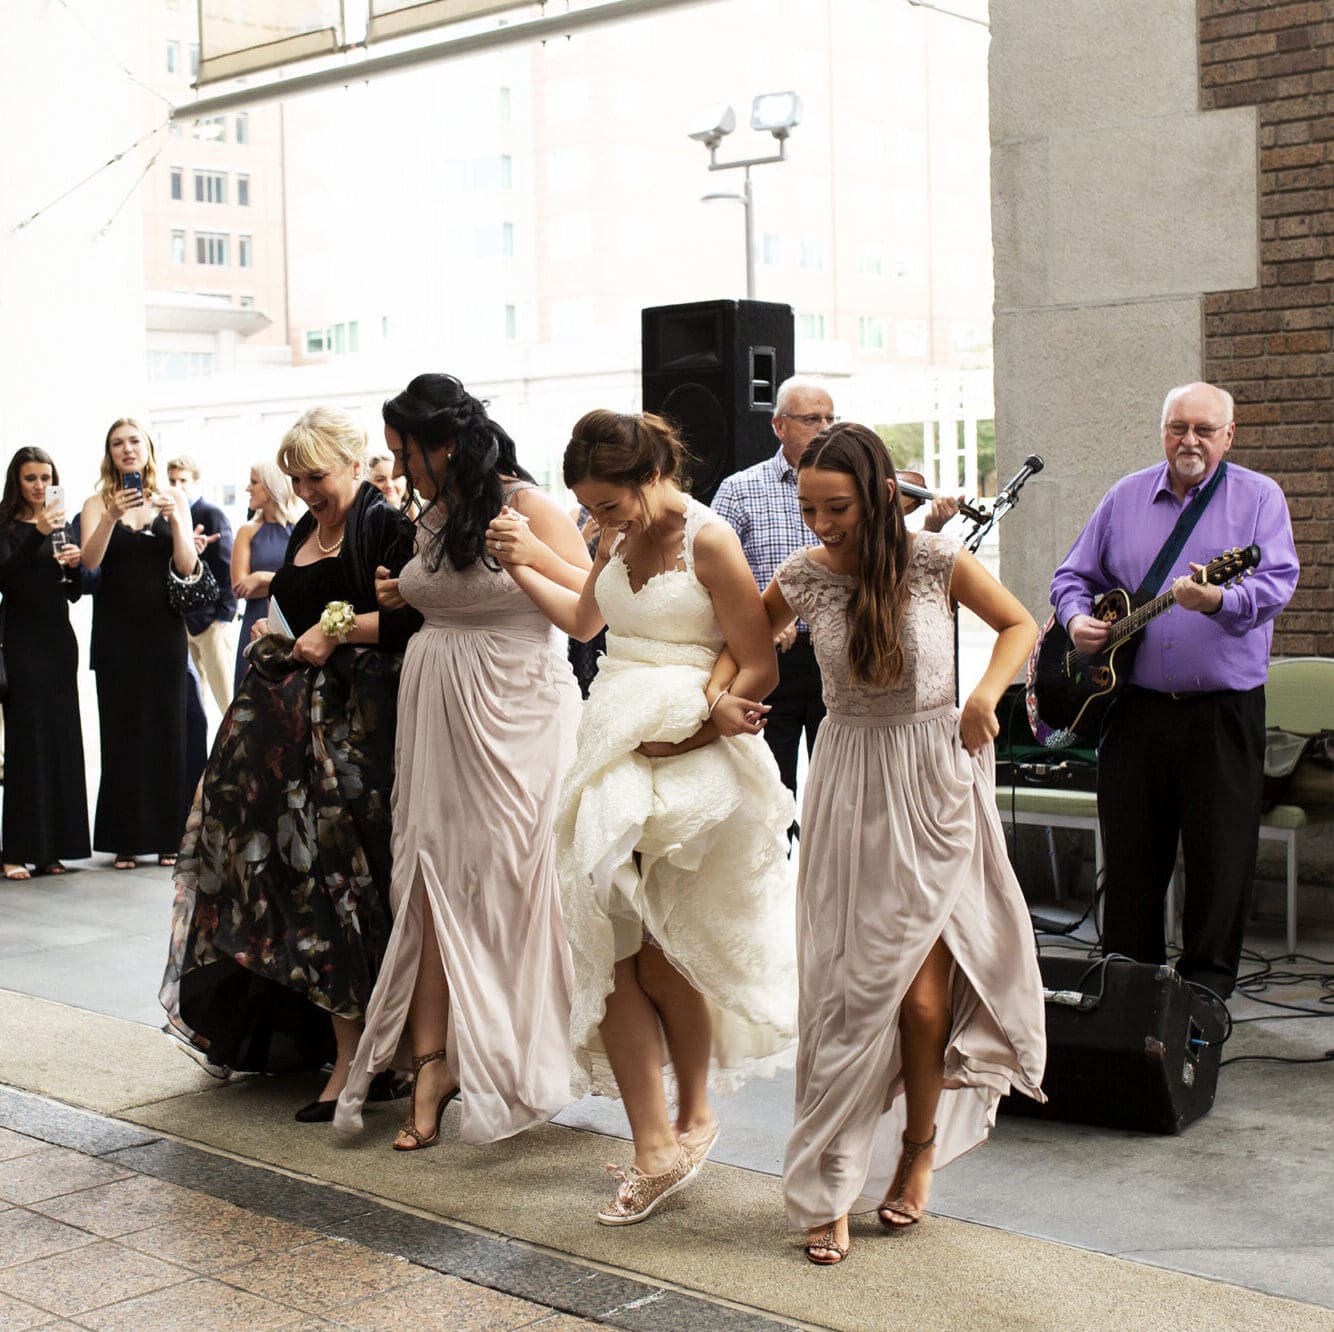 A bride dances with her mother and sisters to Irish music at a wedding in downtown Boston